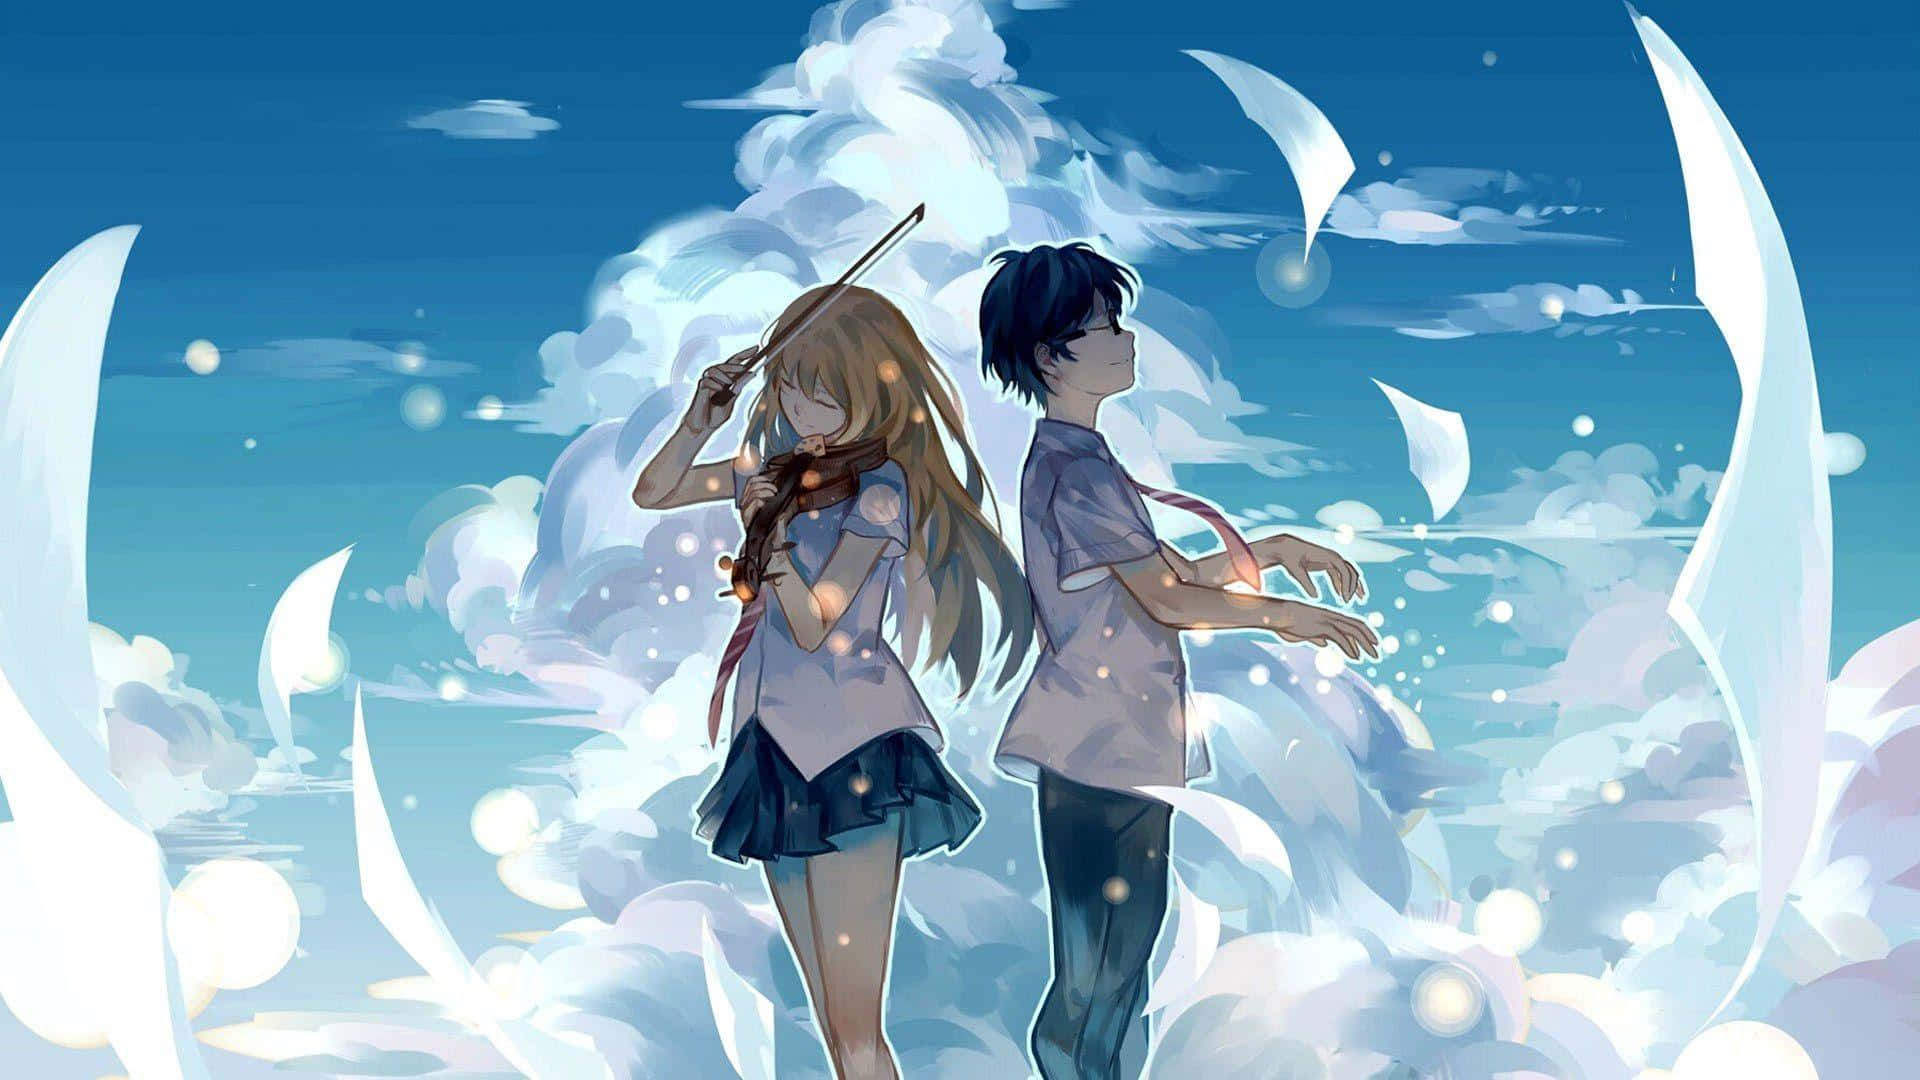 An adorable couple in an anime inspired aesthetic Wallpaper